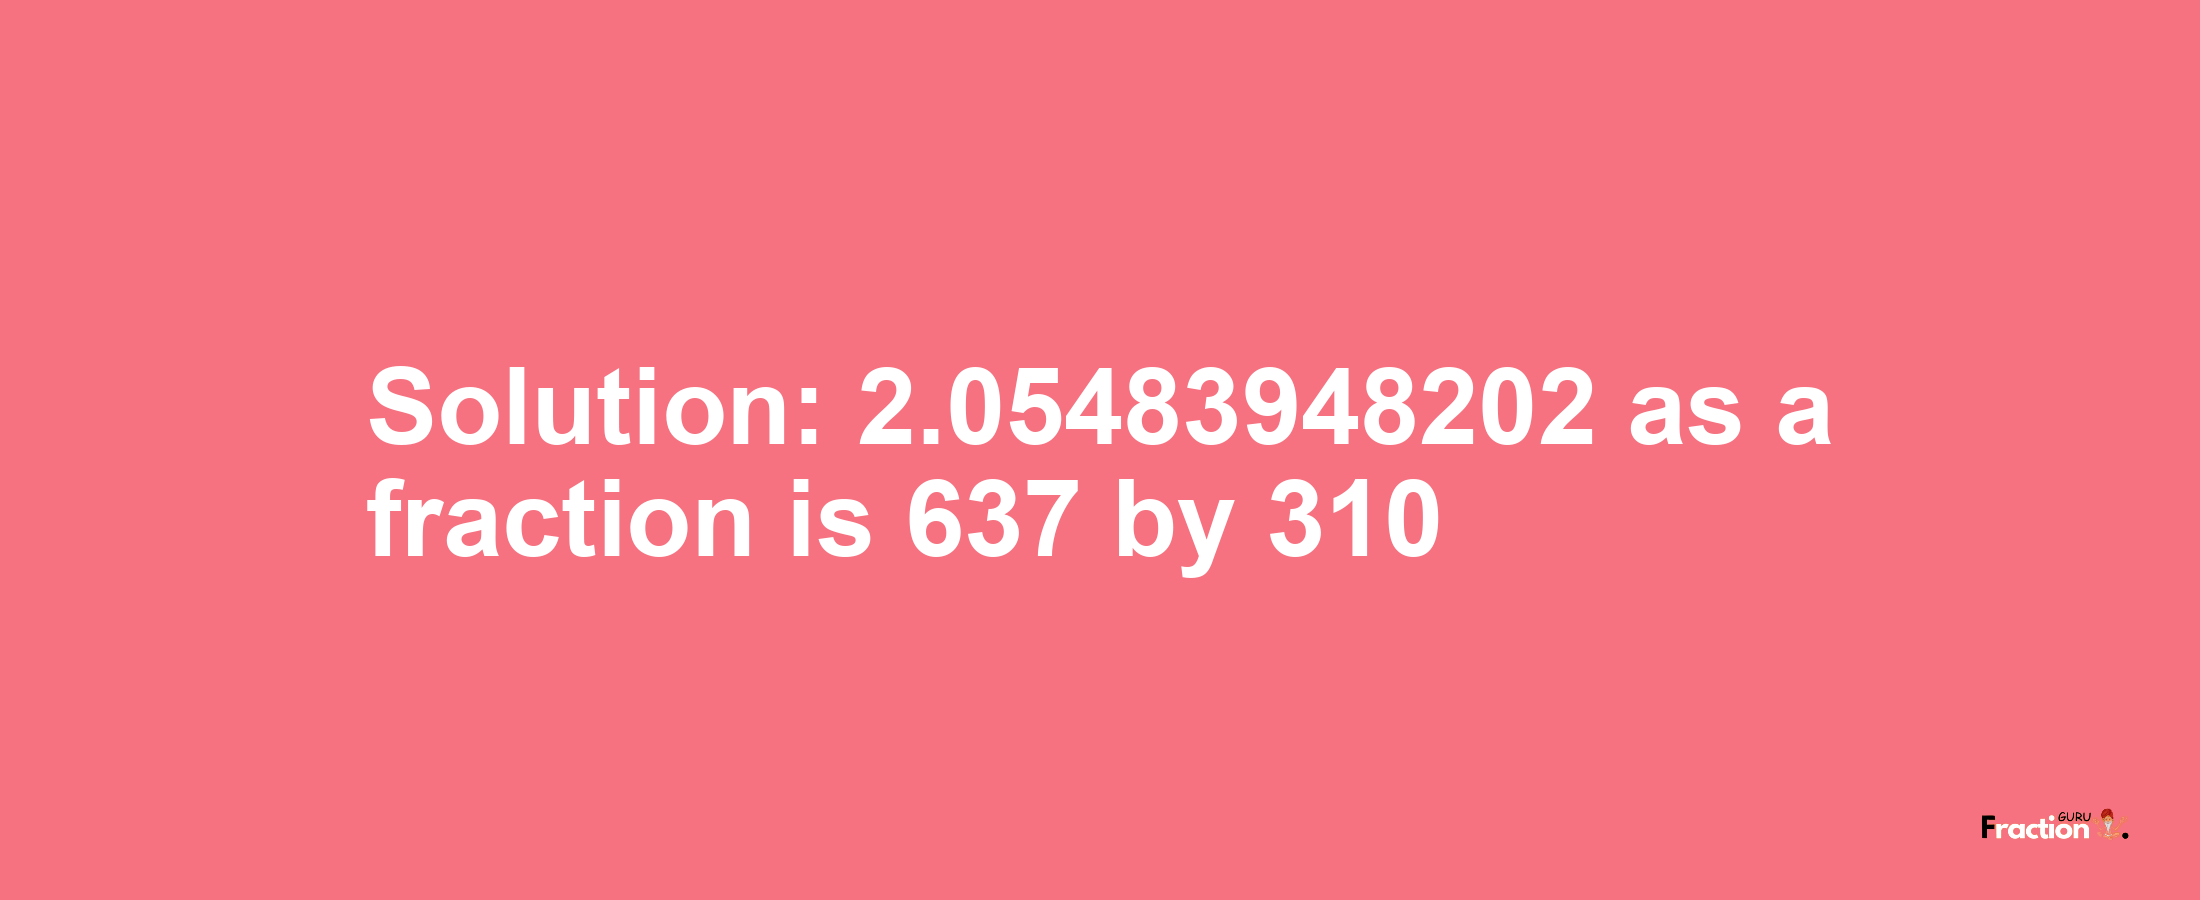 Solution:2.05483948202 as a fraction is 637/310